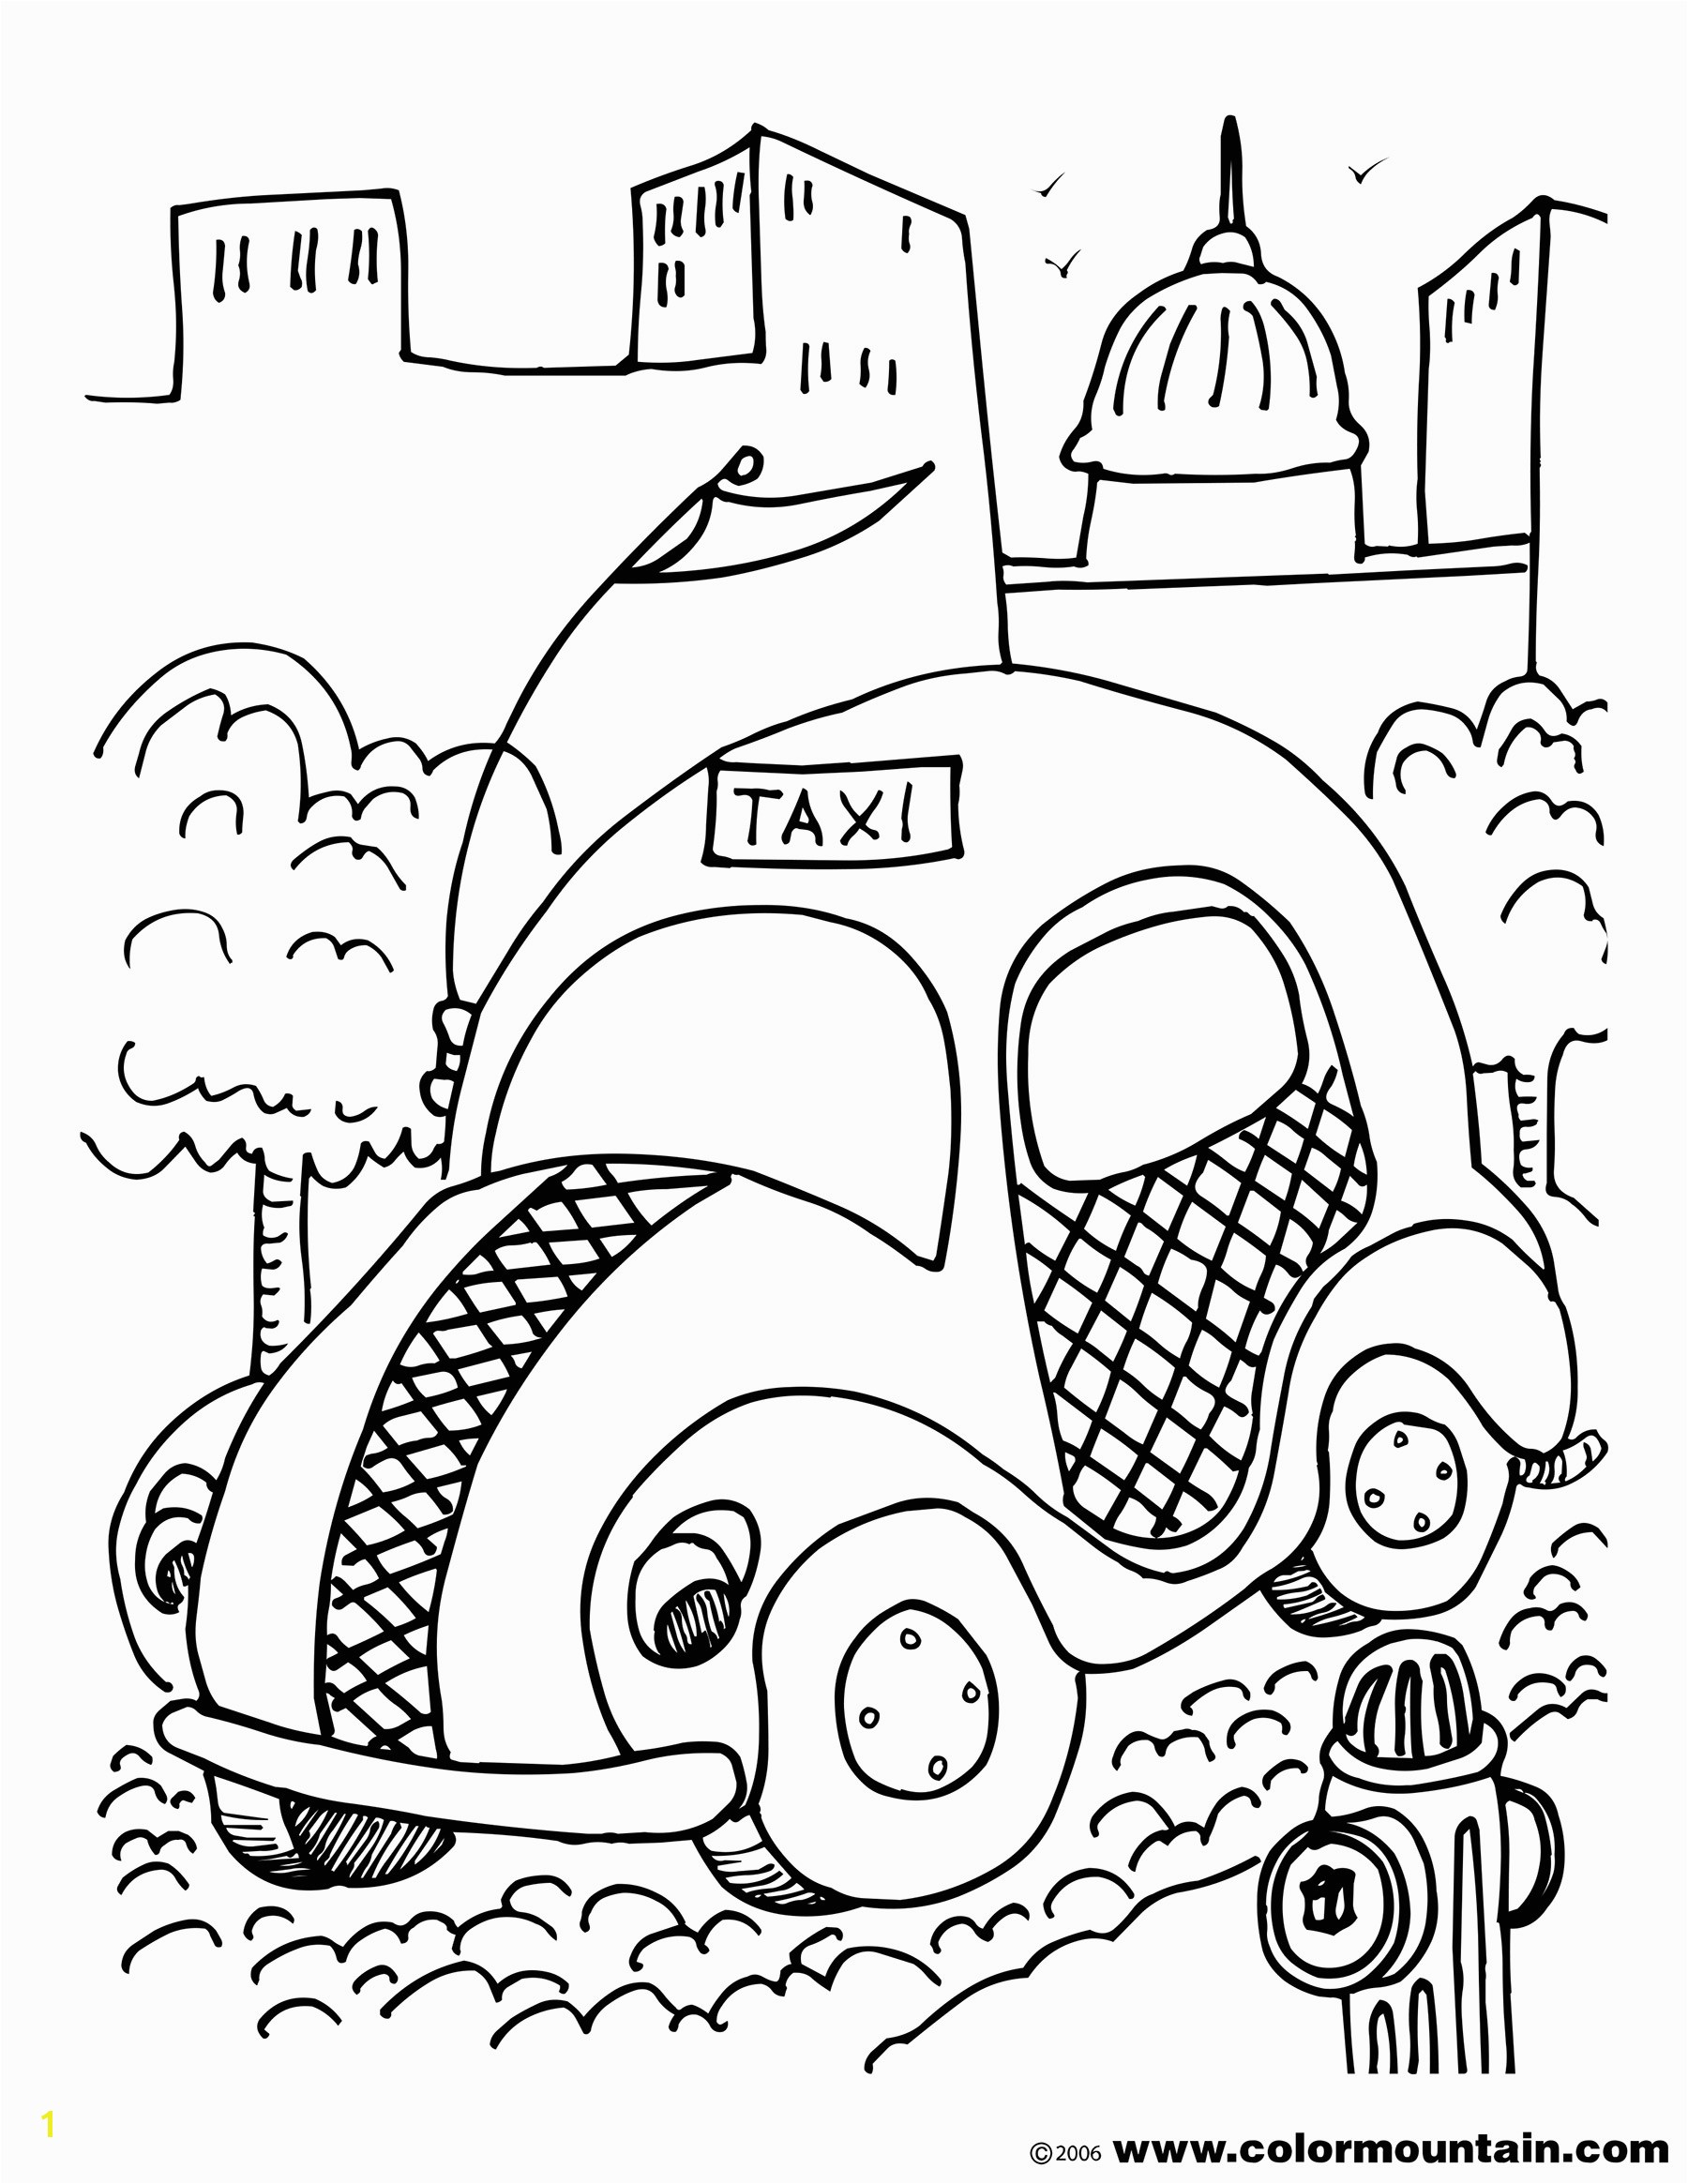 Taxi Coloring Page Free Taxi Coloring Sheet Create A Printout Activity